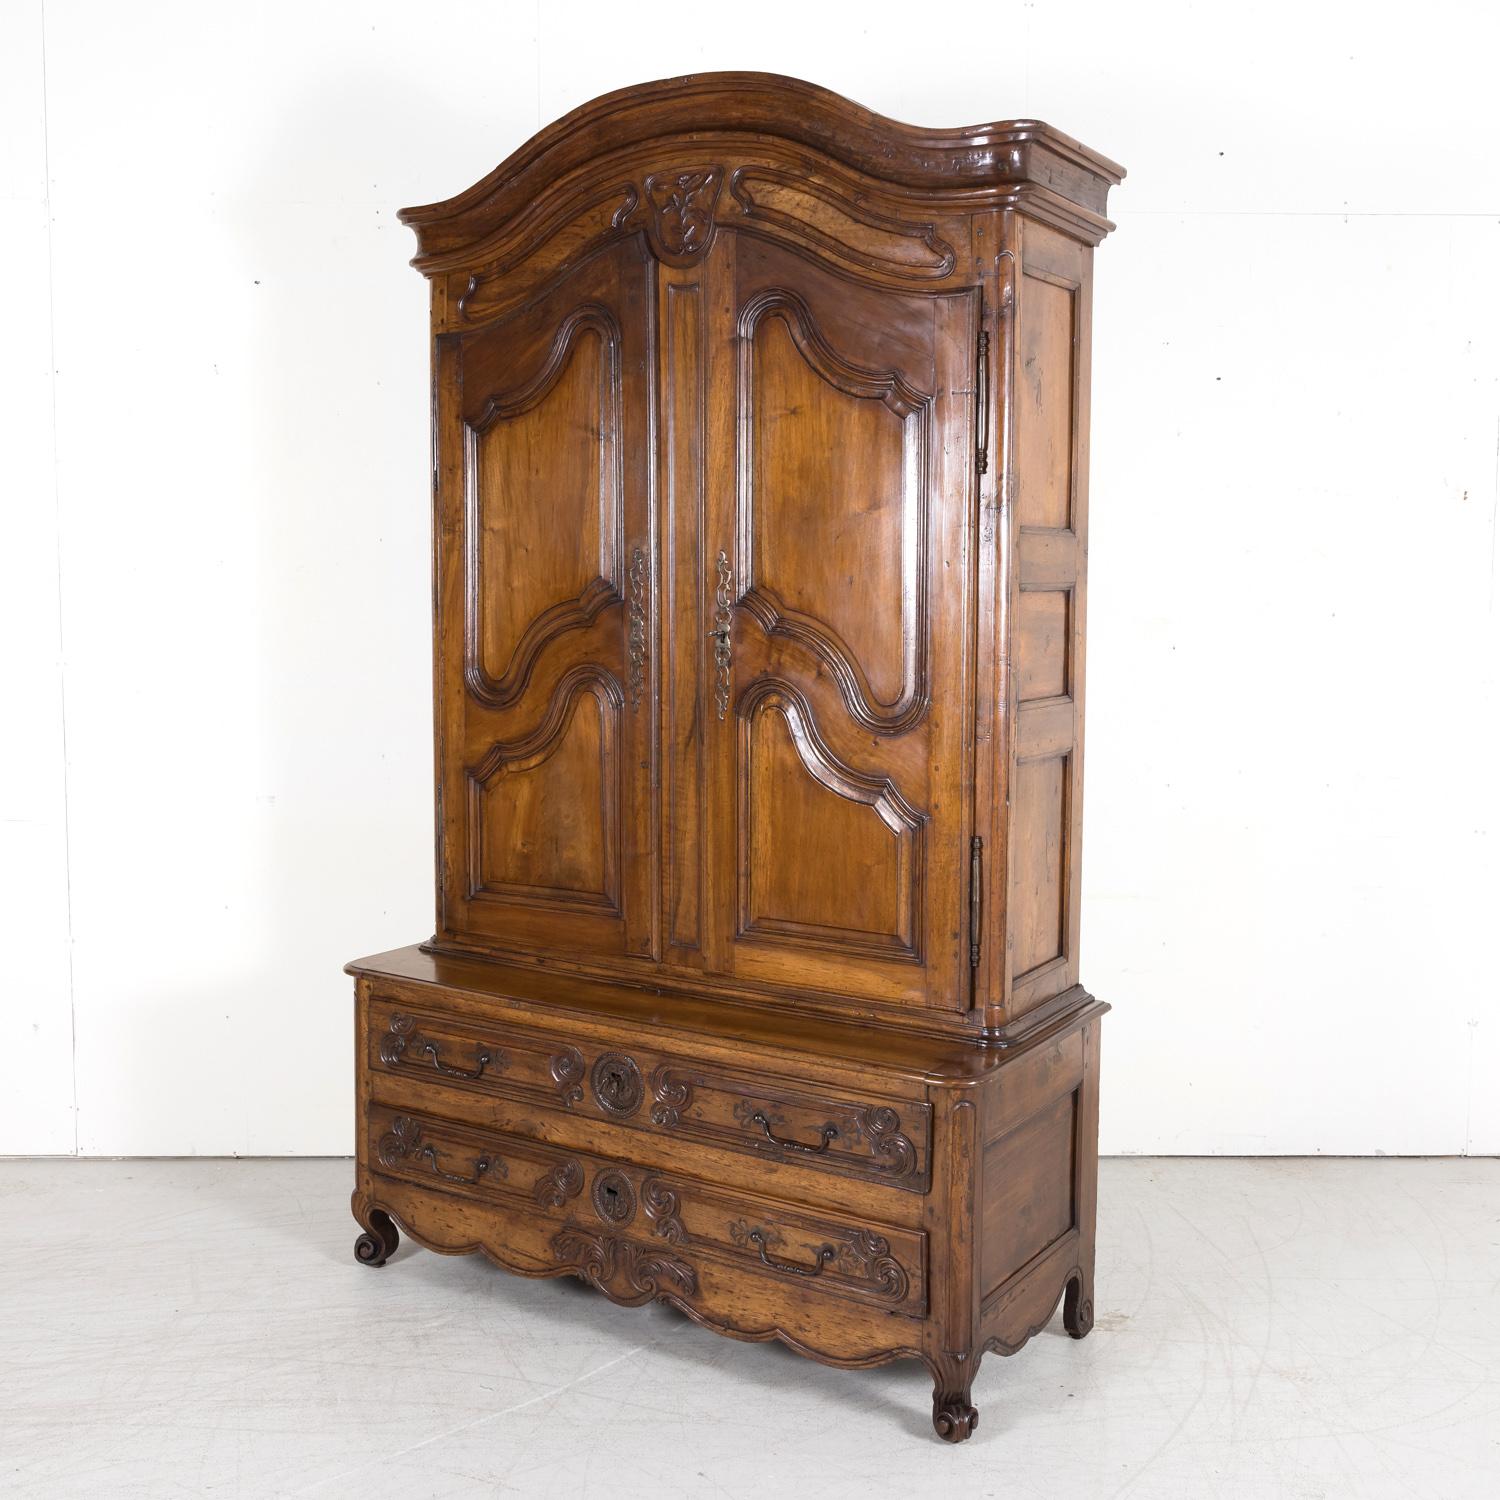 18th century French Louis XV period armoire deux corps pantalonnier handcrafted of old growth French walnut by skilled artisans in the South of France near Aix-en-Provence, circa 1750s. Similar to a linen press, this rare two-piece cabinet features